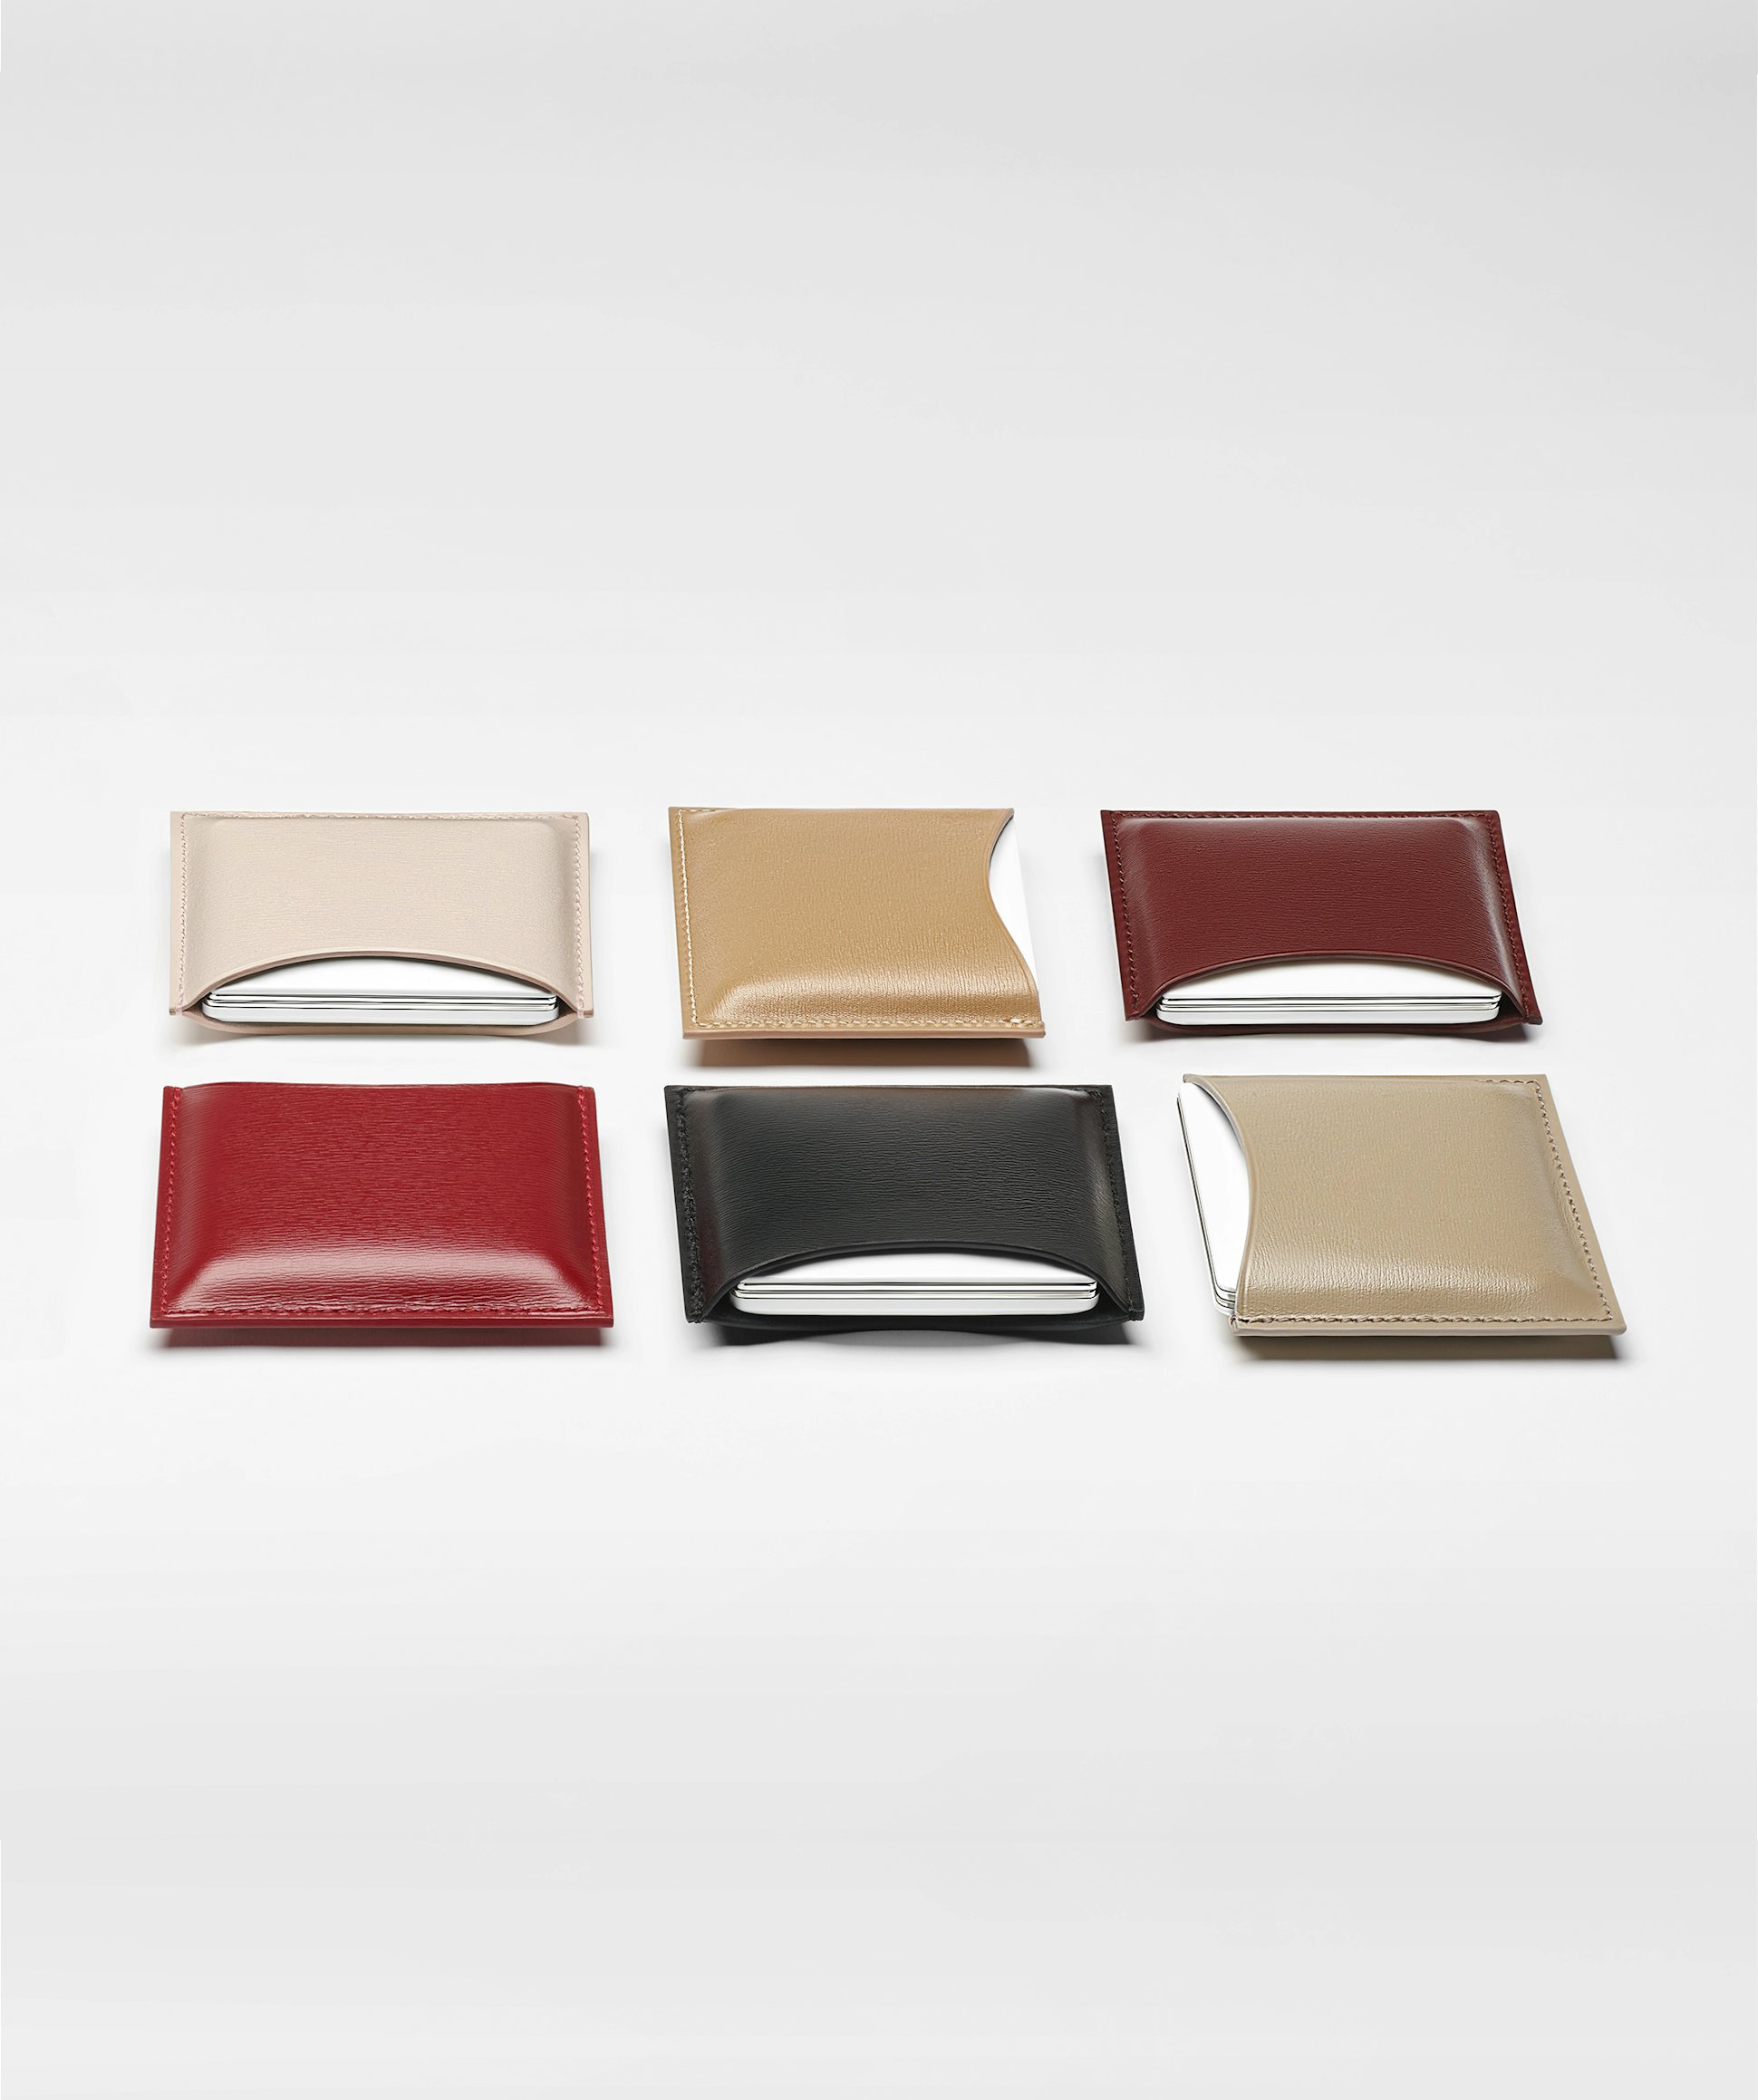 La bouche rouge, Paris leather compact case family in pink, camel, chocolate, red, black and beige